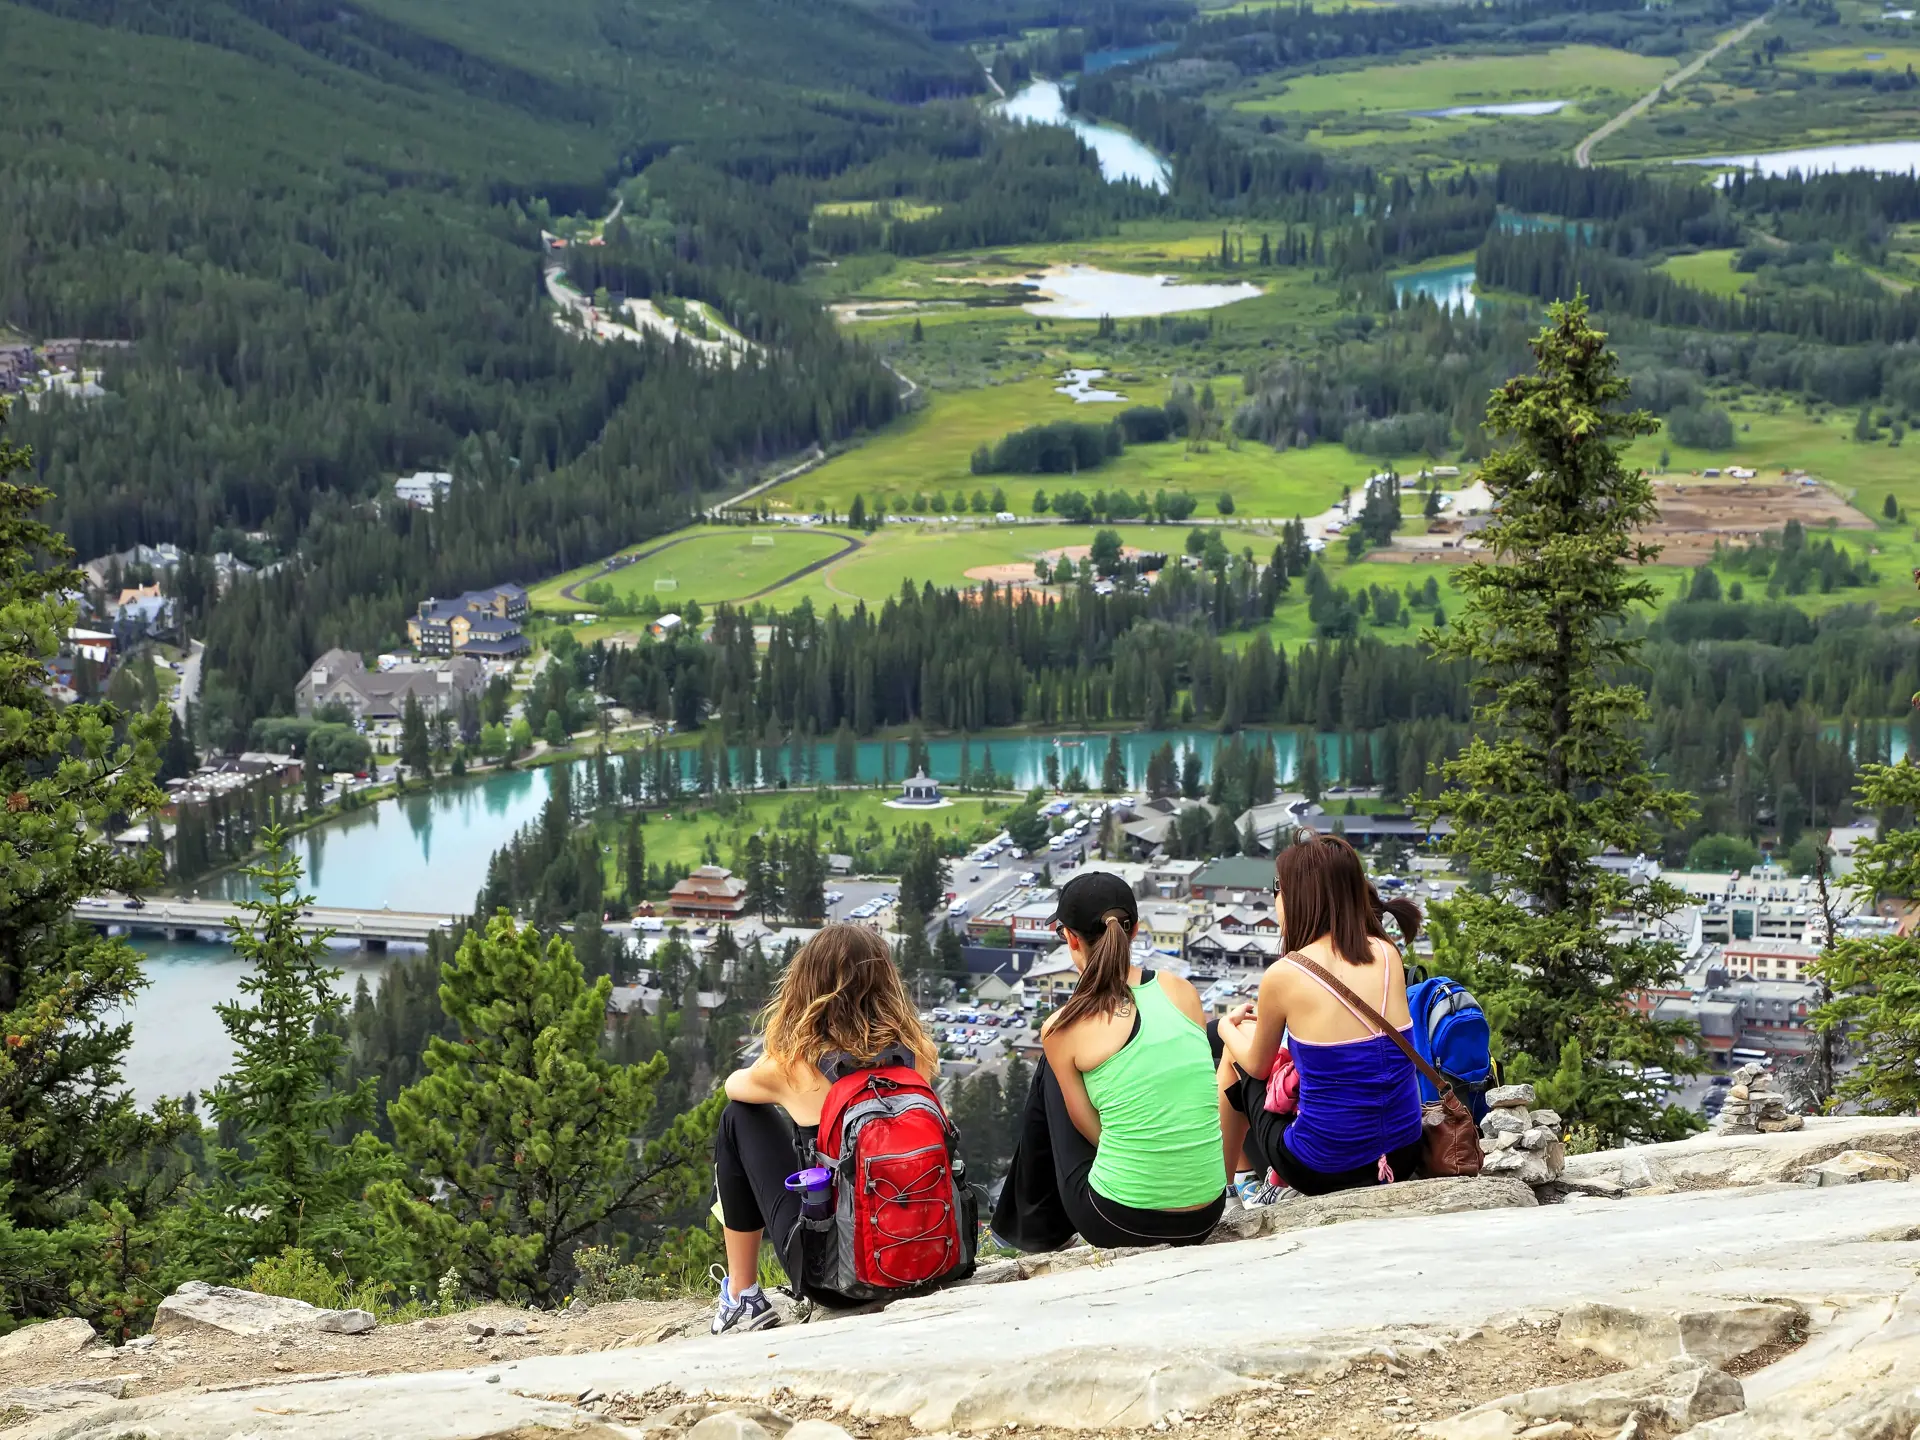 shutterstock_83229271 ourists sitting on a grief and looking at a panorama of a small town Banff in a Bow river valley (Banff NP).jpg